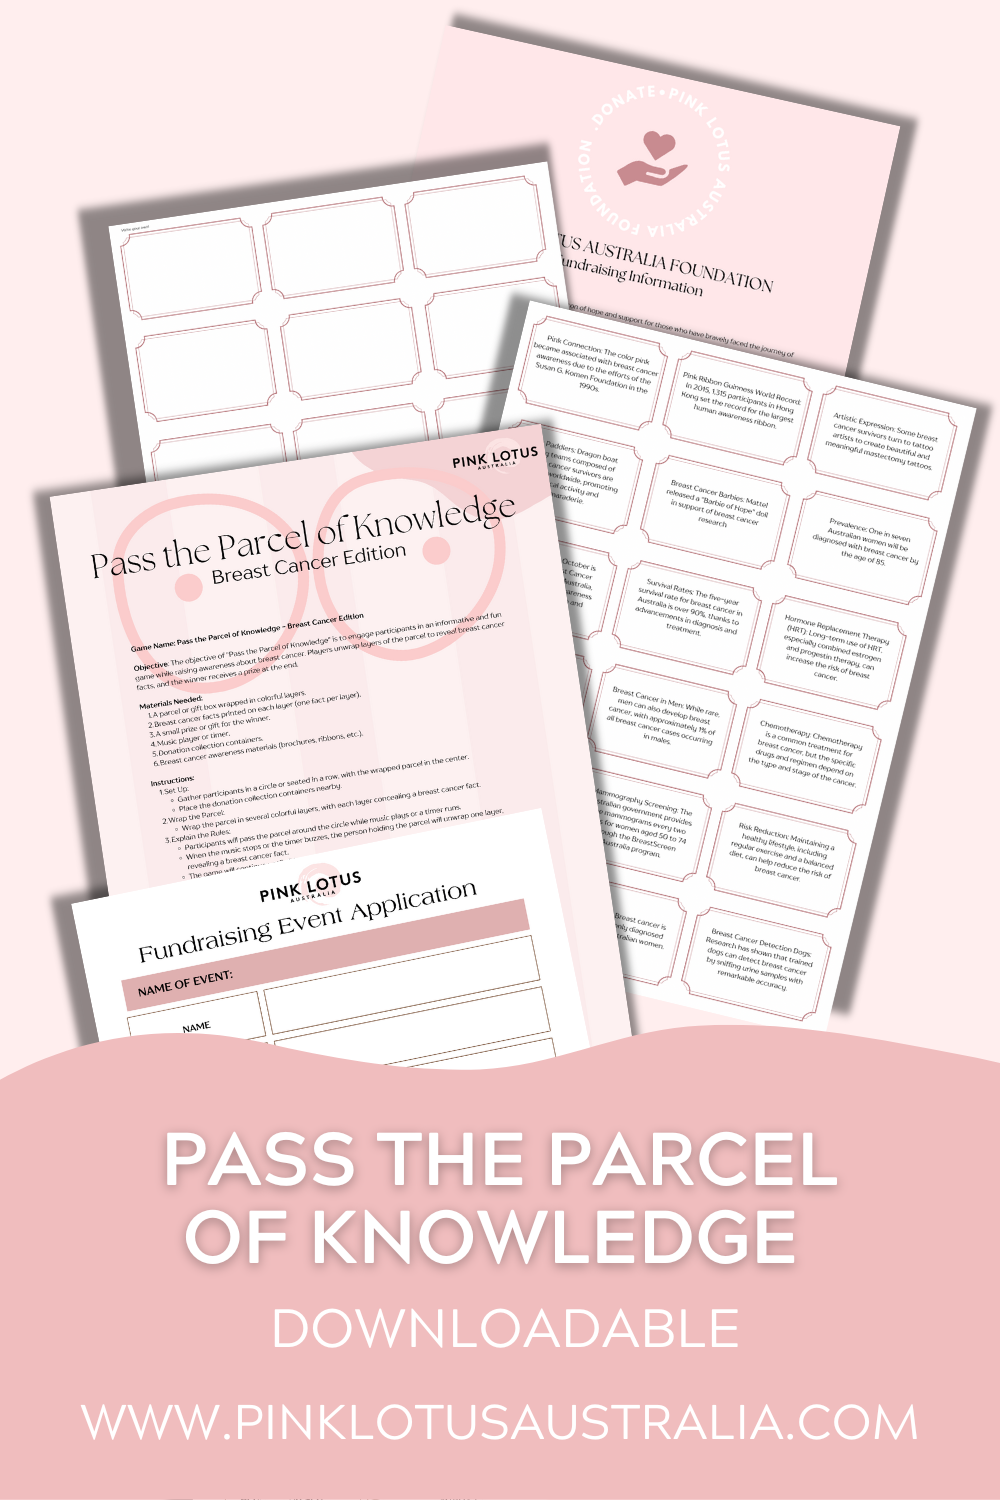 Downloadable- ‘Pass the Parcel of Knowledge’ FREE